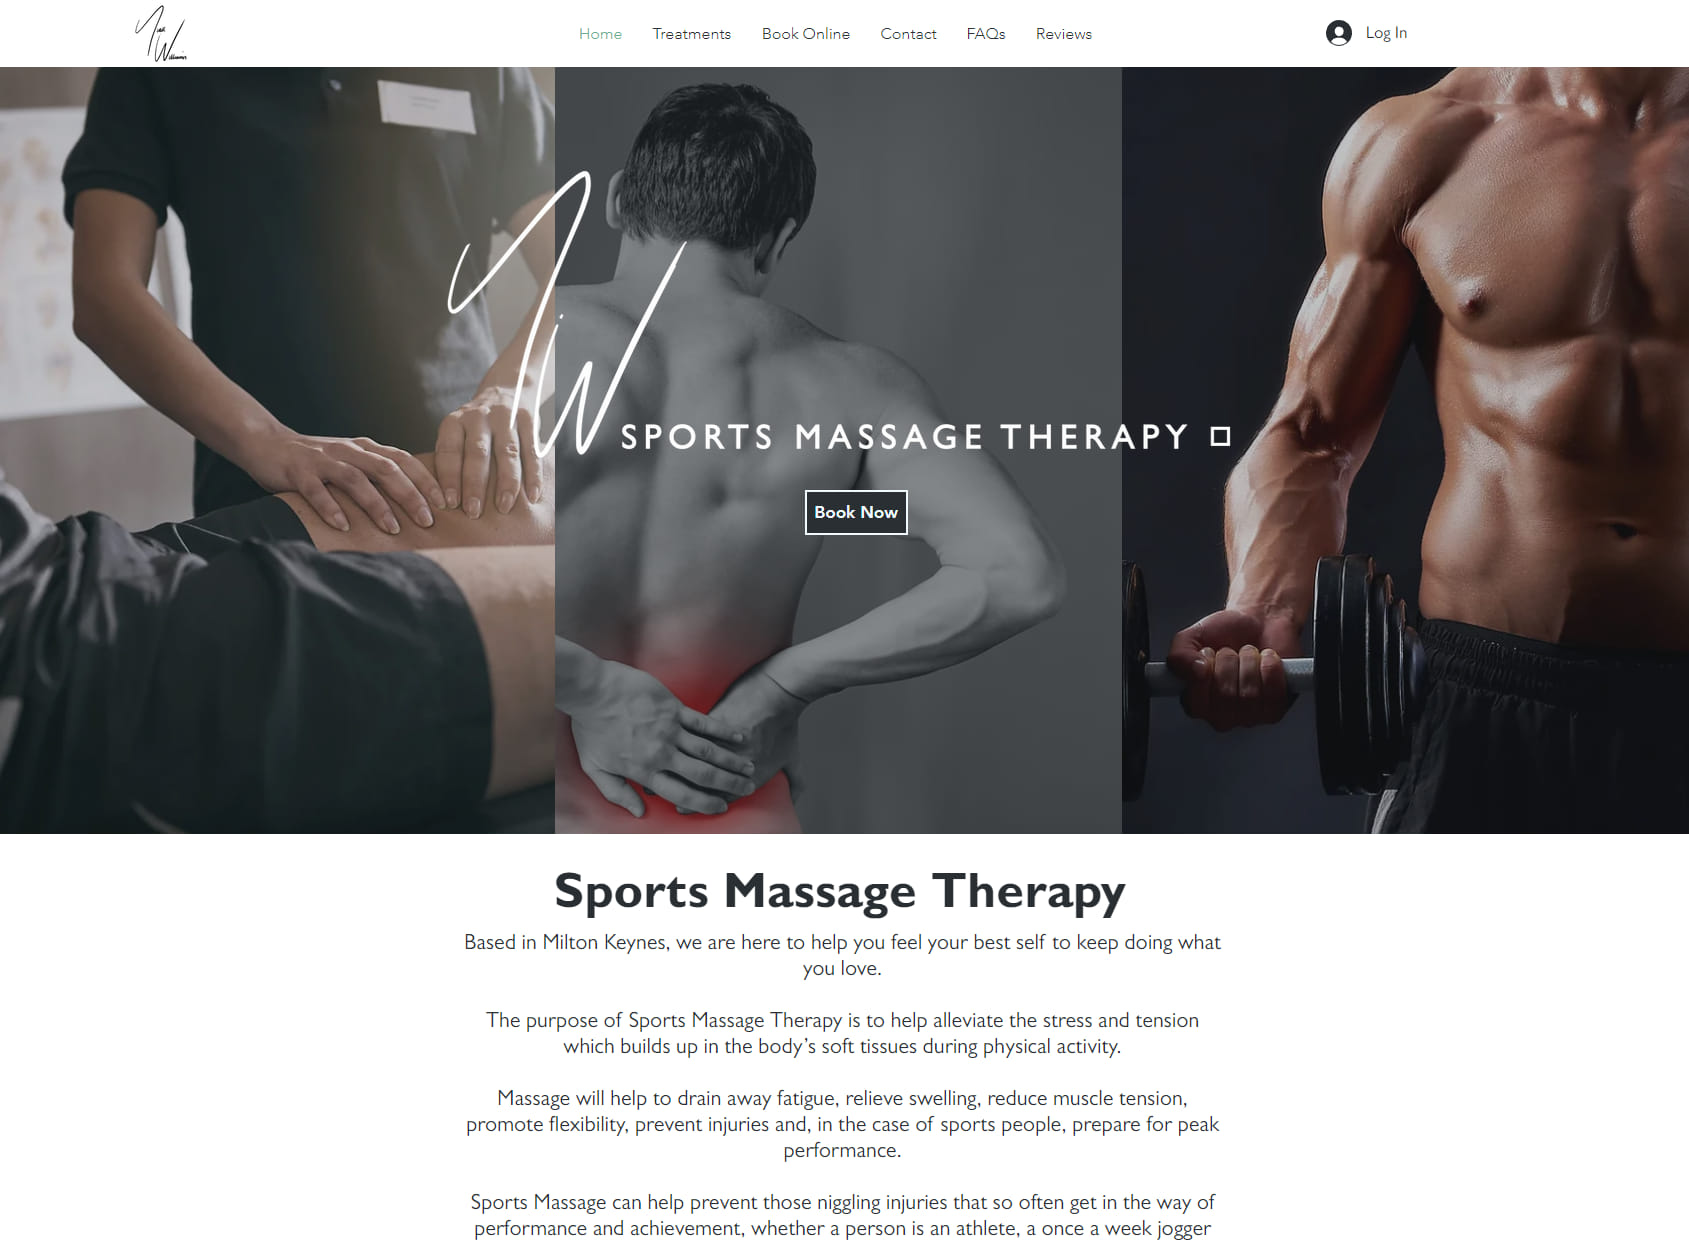 NW Sports Massage Therapy